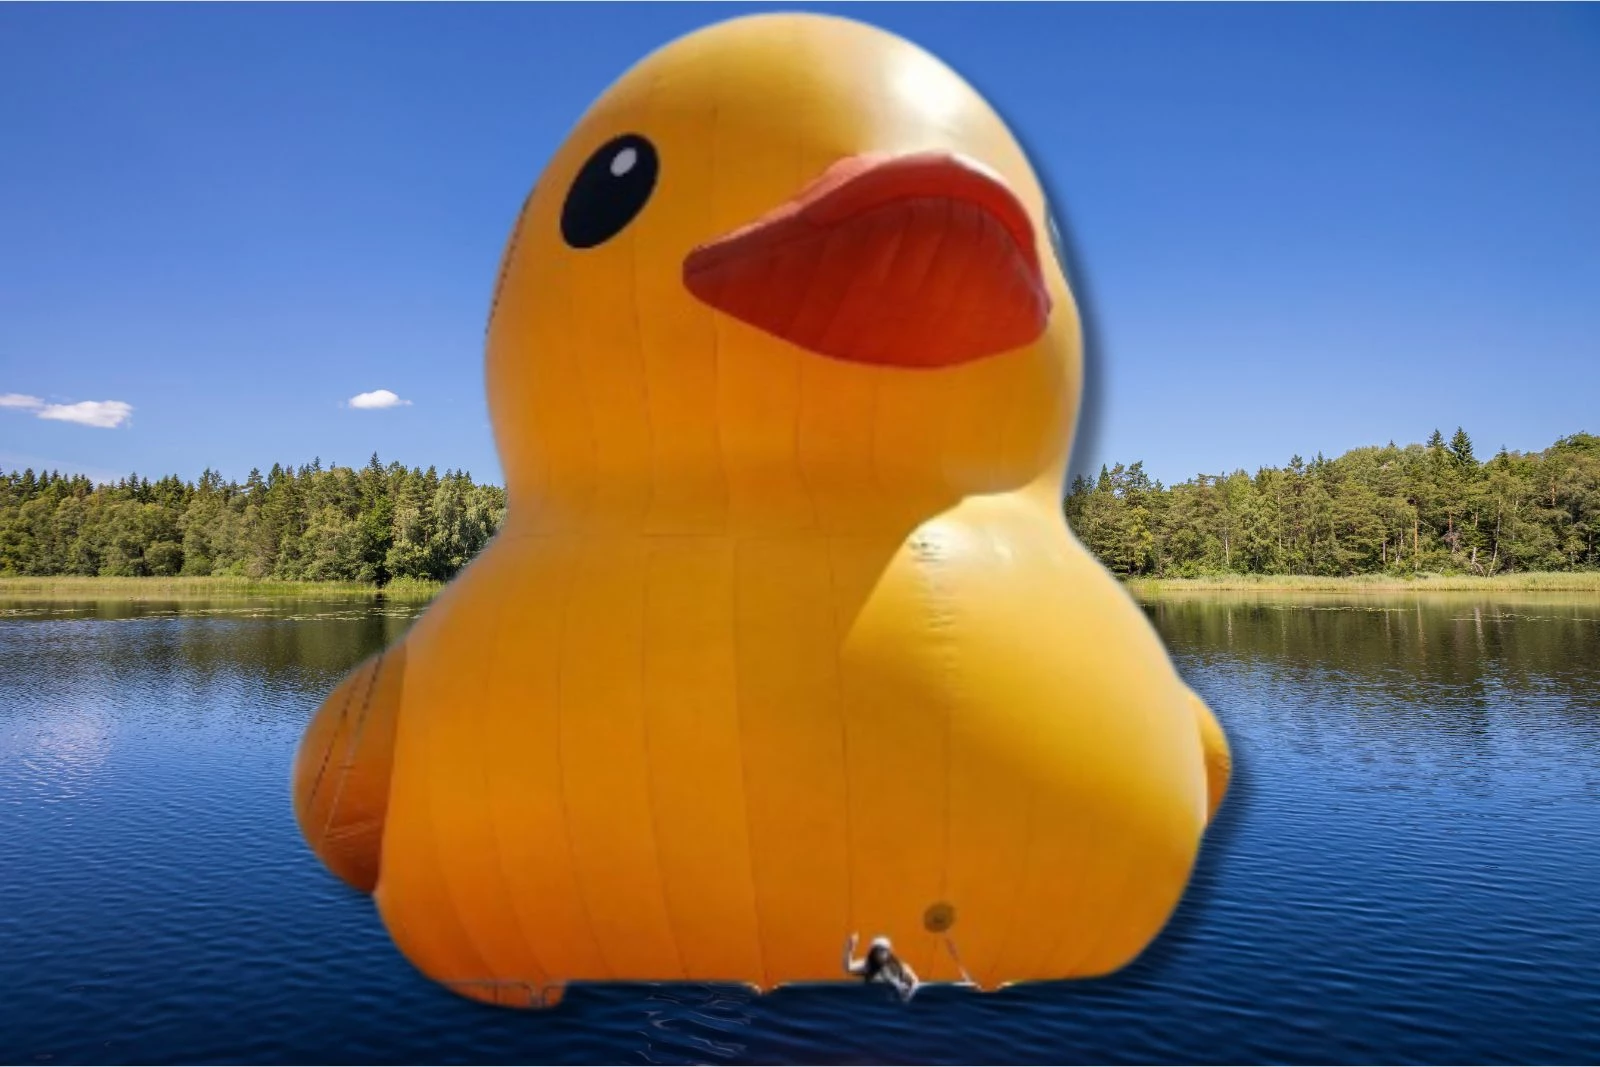 RUBBA DUB DUB! Biggest Rubber Ducky in the World is Coming To Michigan